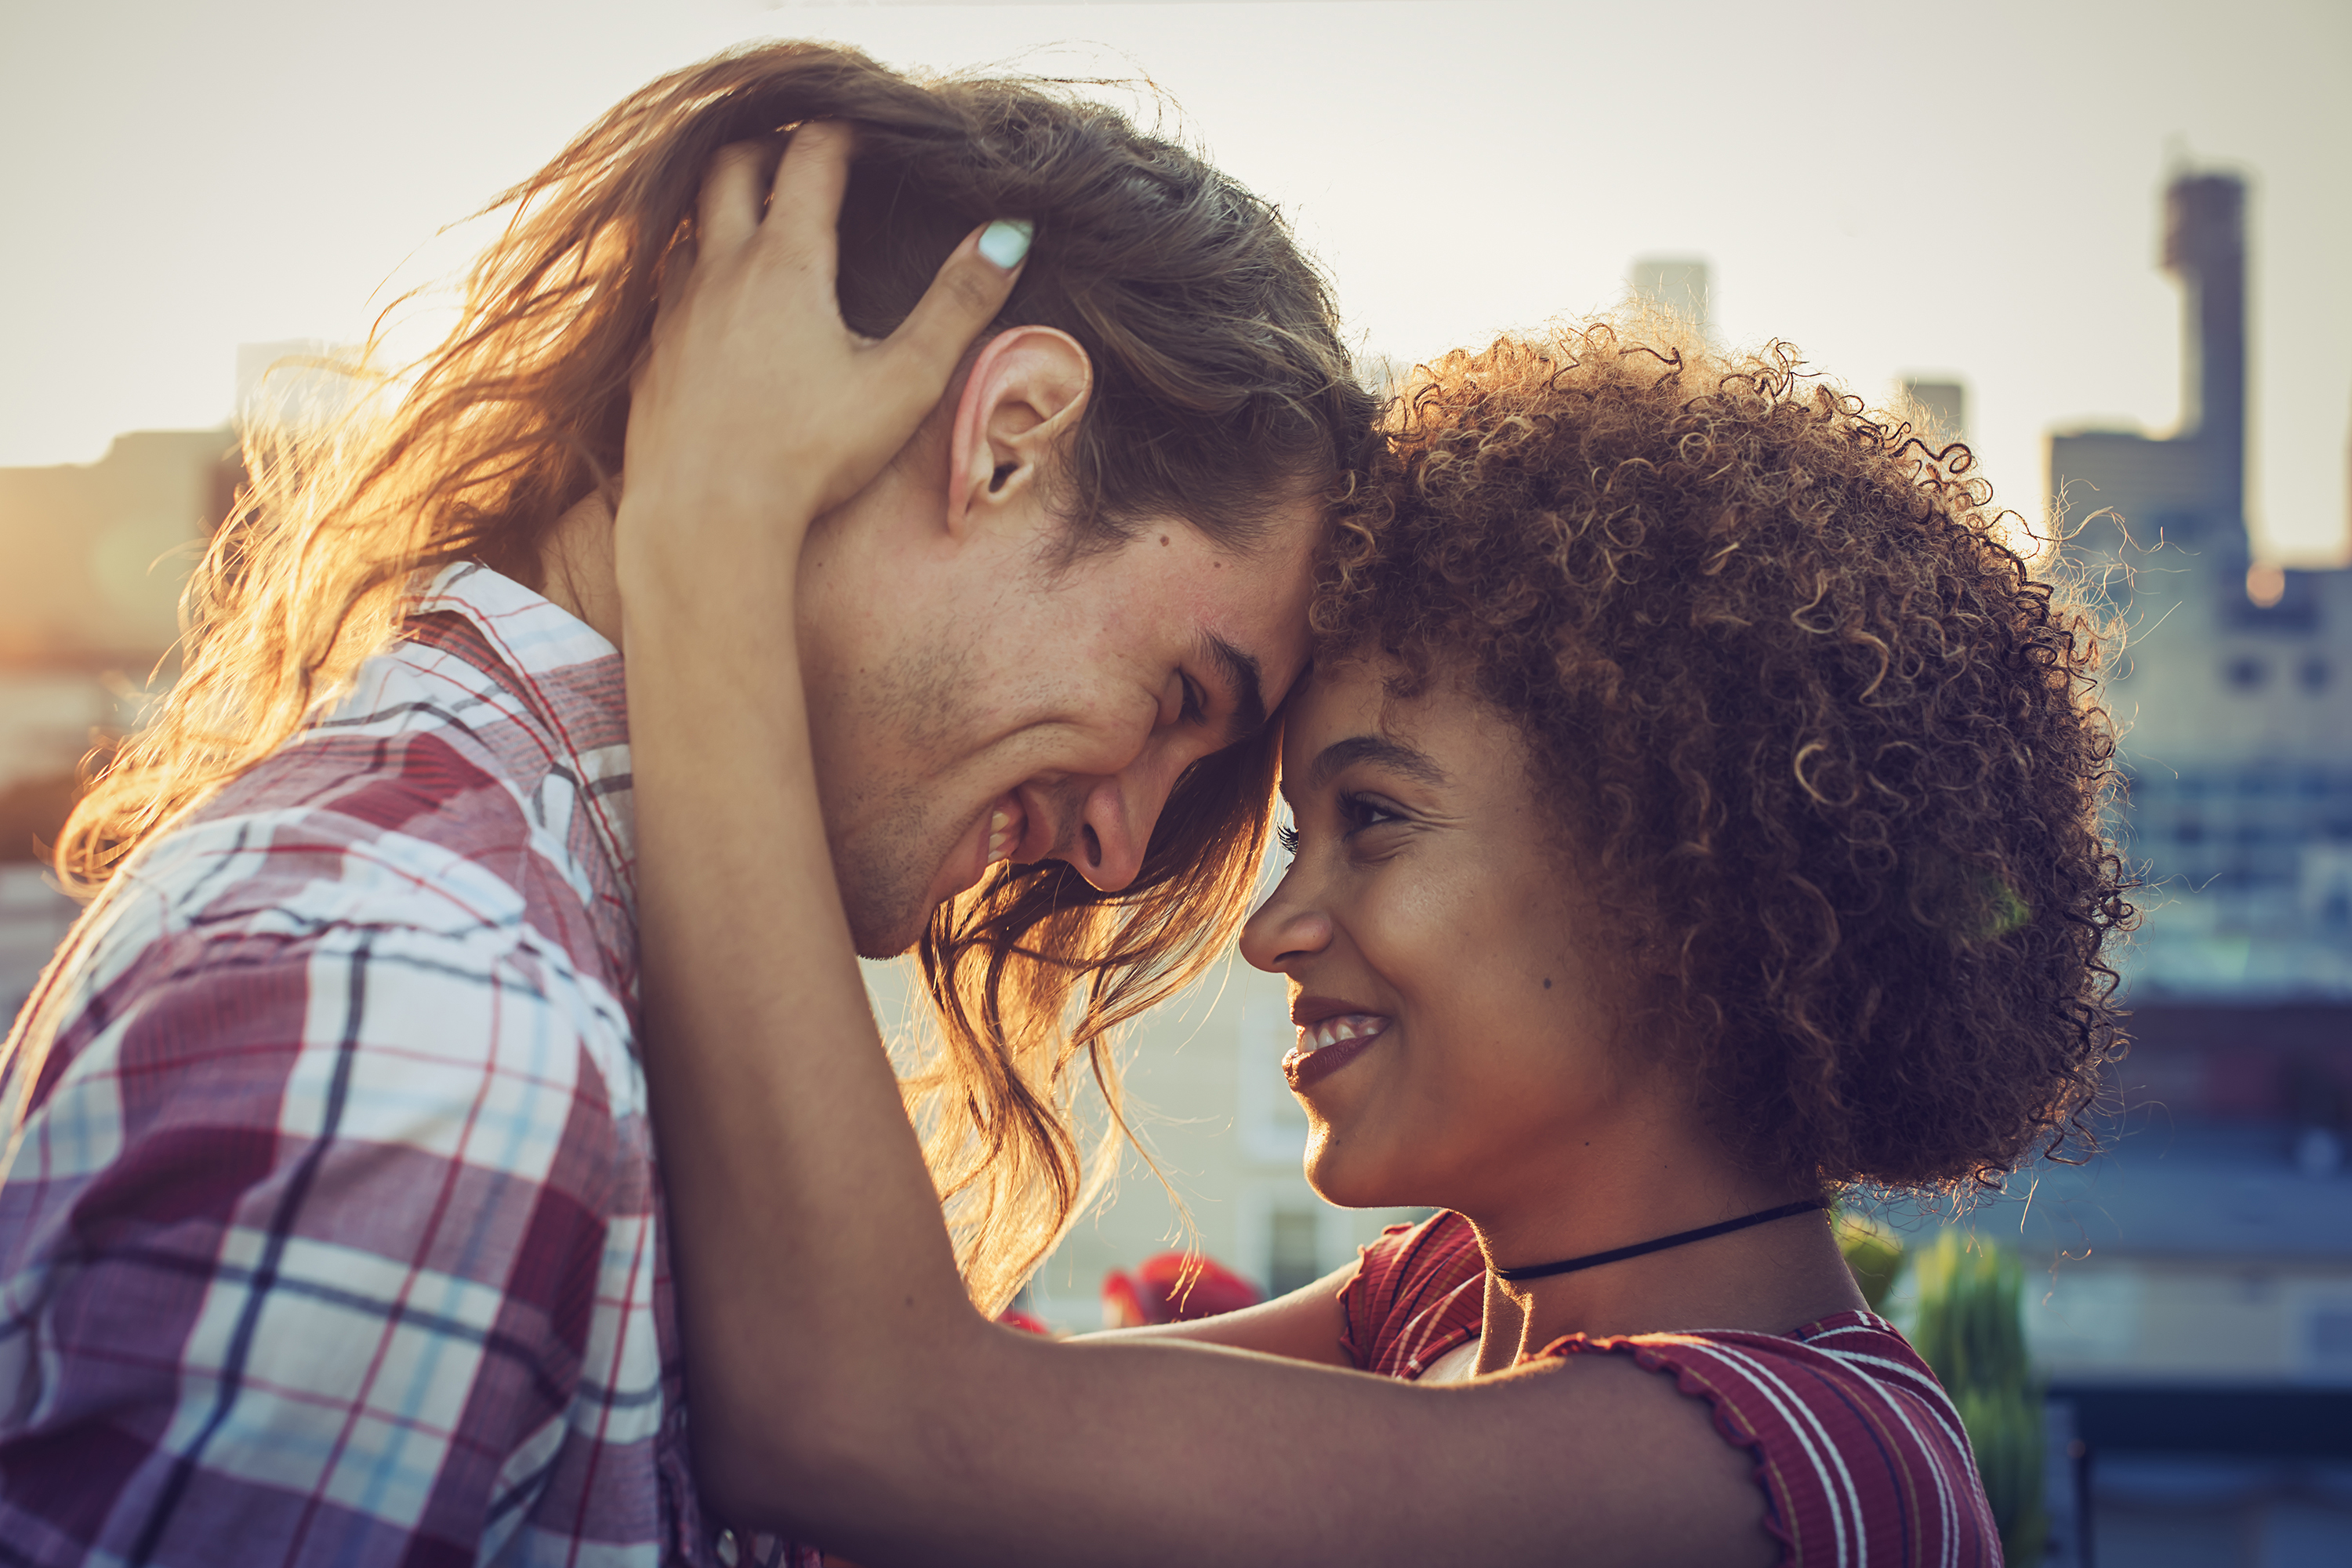 18 Signs You're Falling in Love with Someone, According to Science